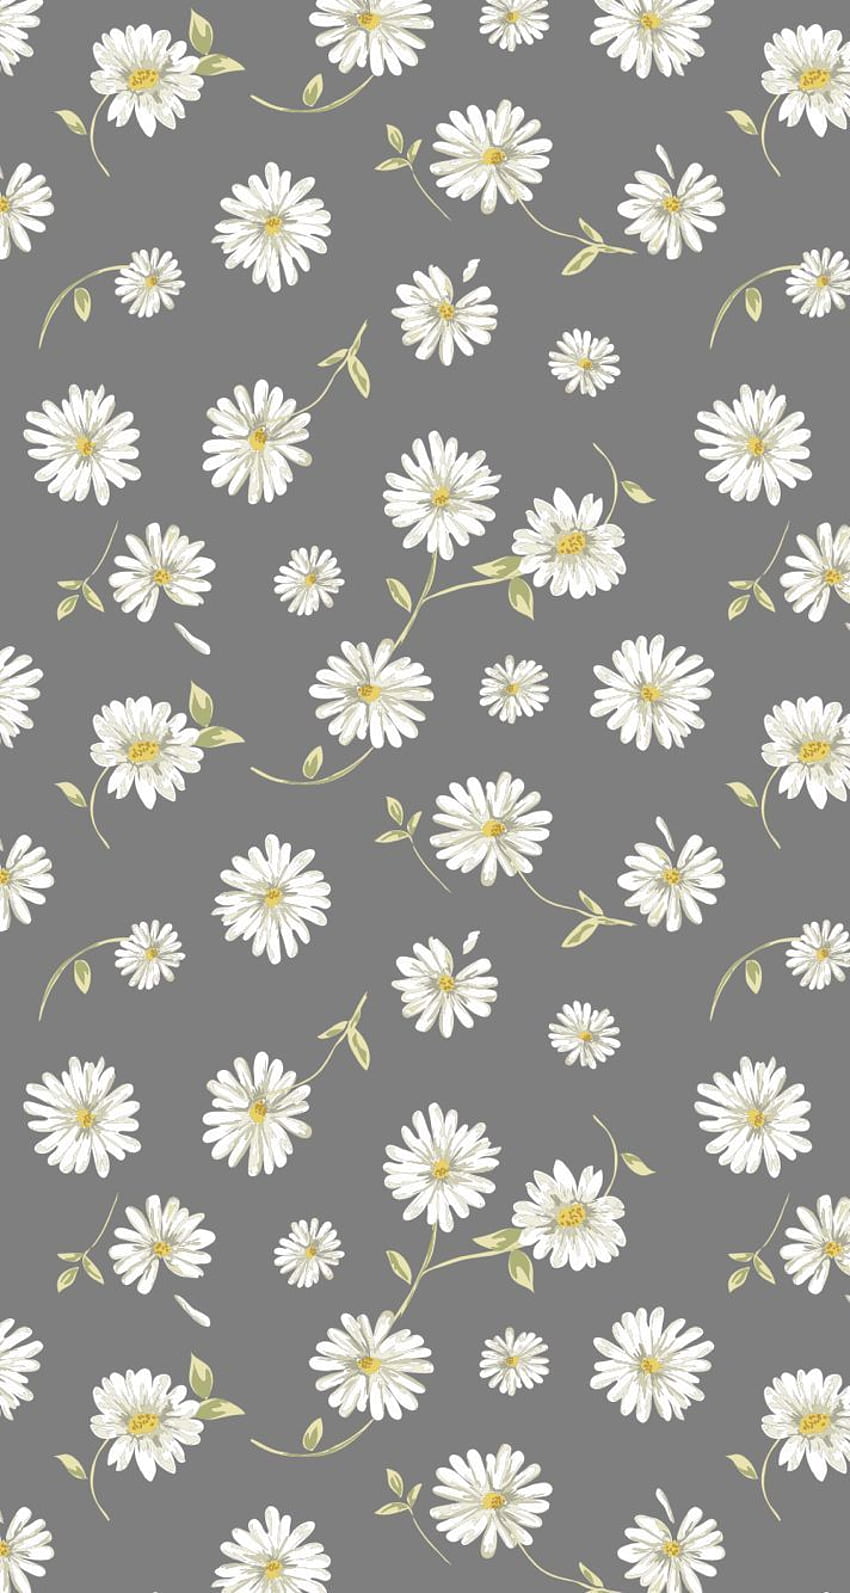 A pattern of white daisies on grey background - Daisy